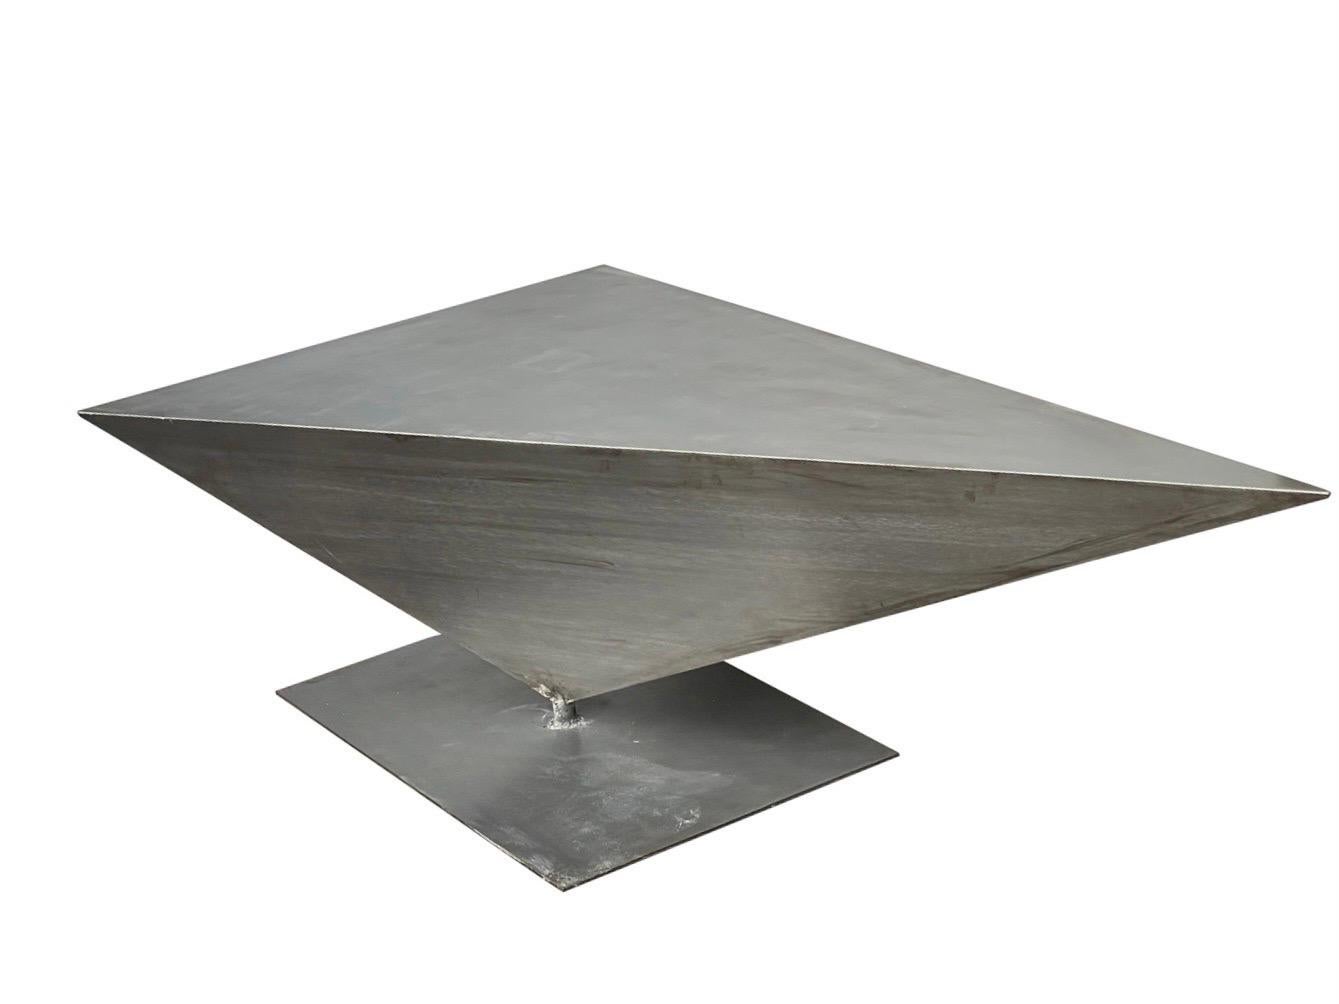 Very unique one-of-a-kind angular sculptured metal table was purchased in Miami from a sculptor in the 1980s no signature